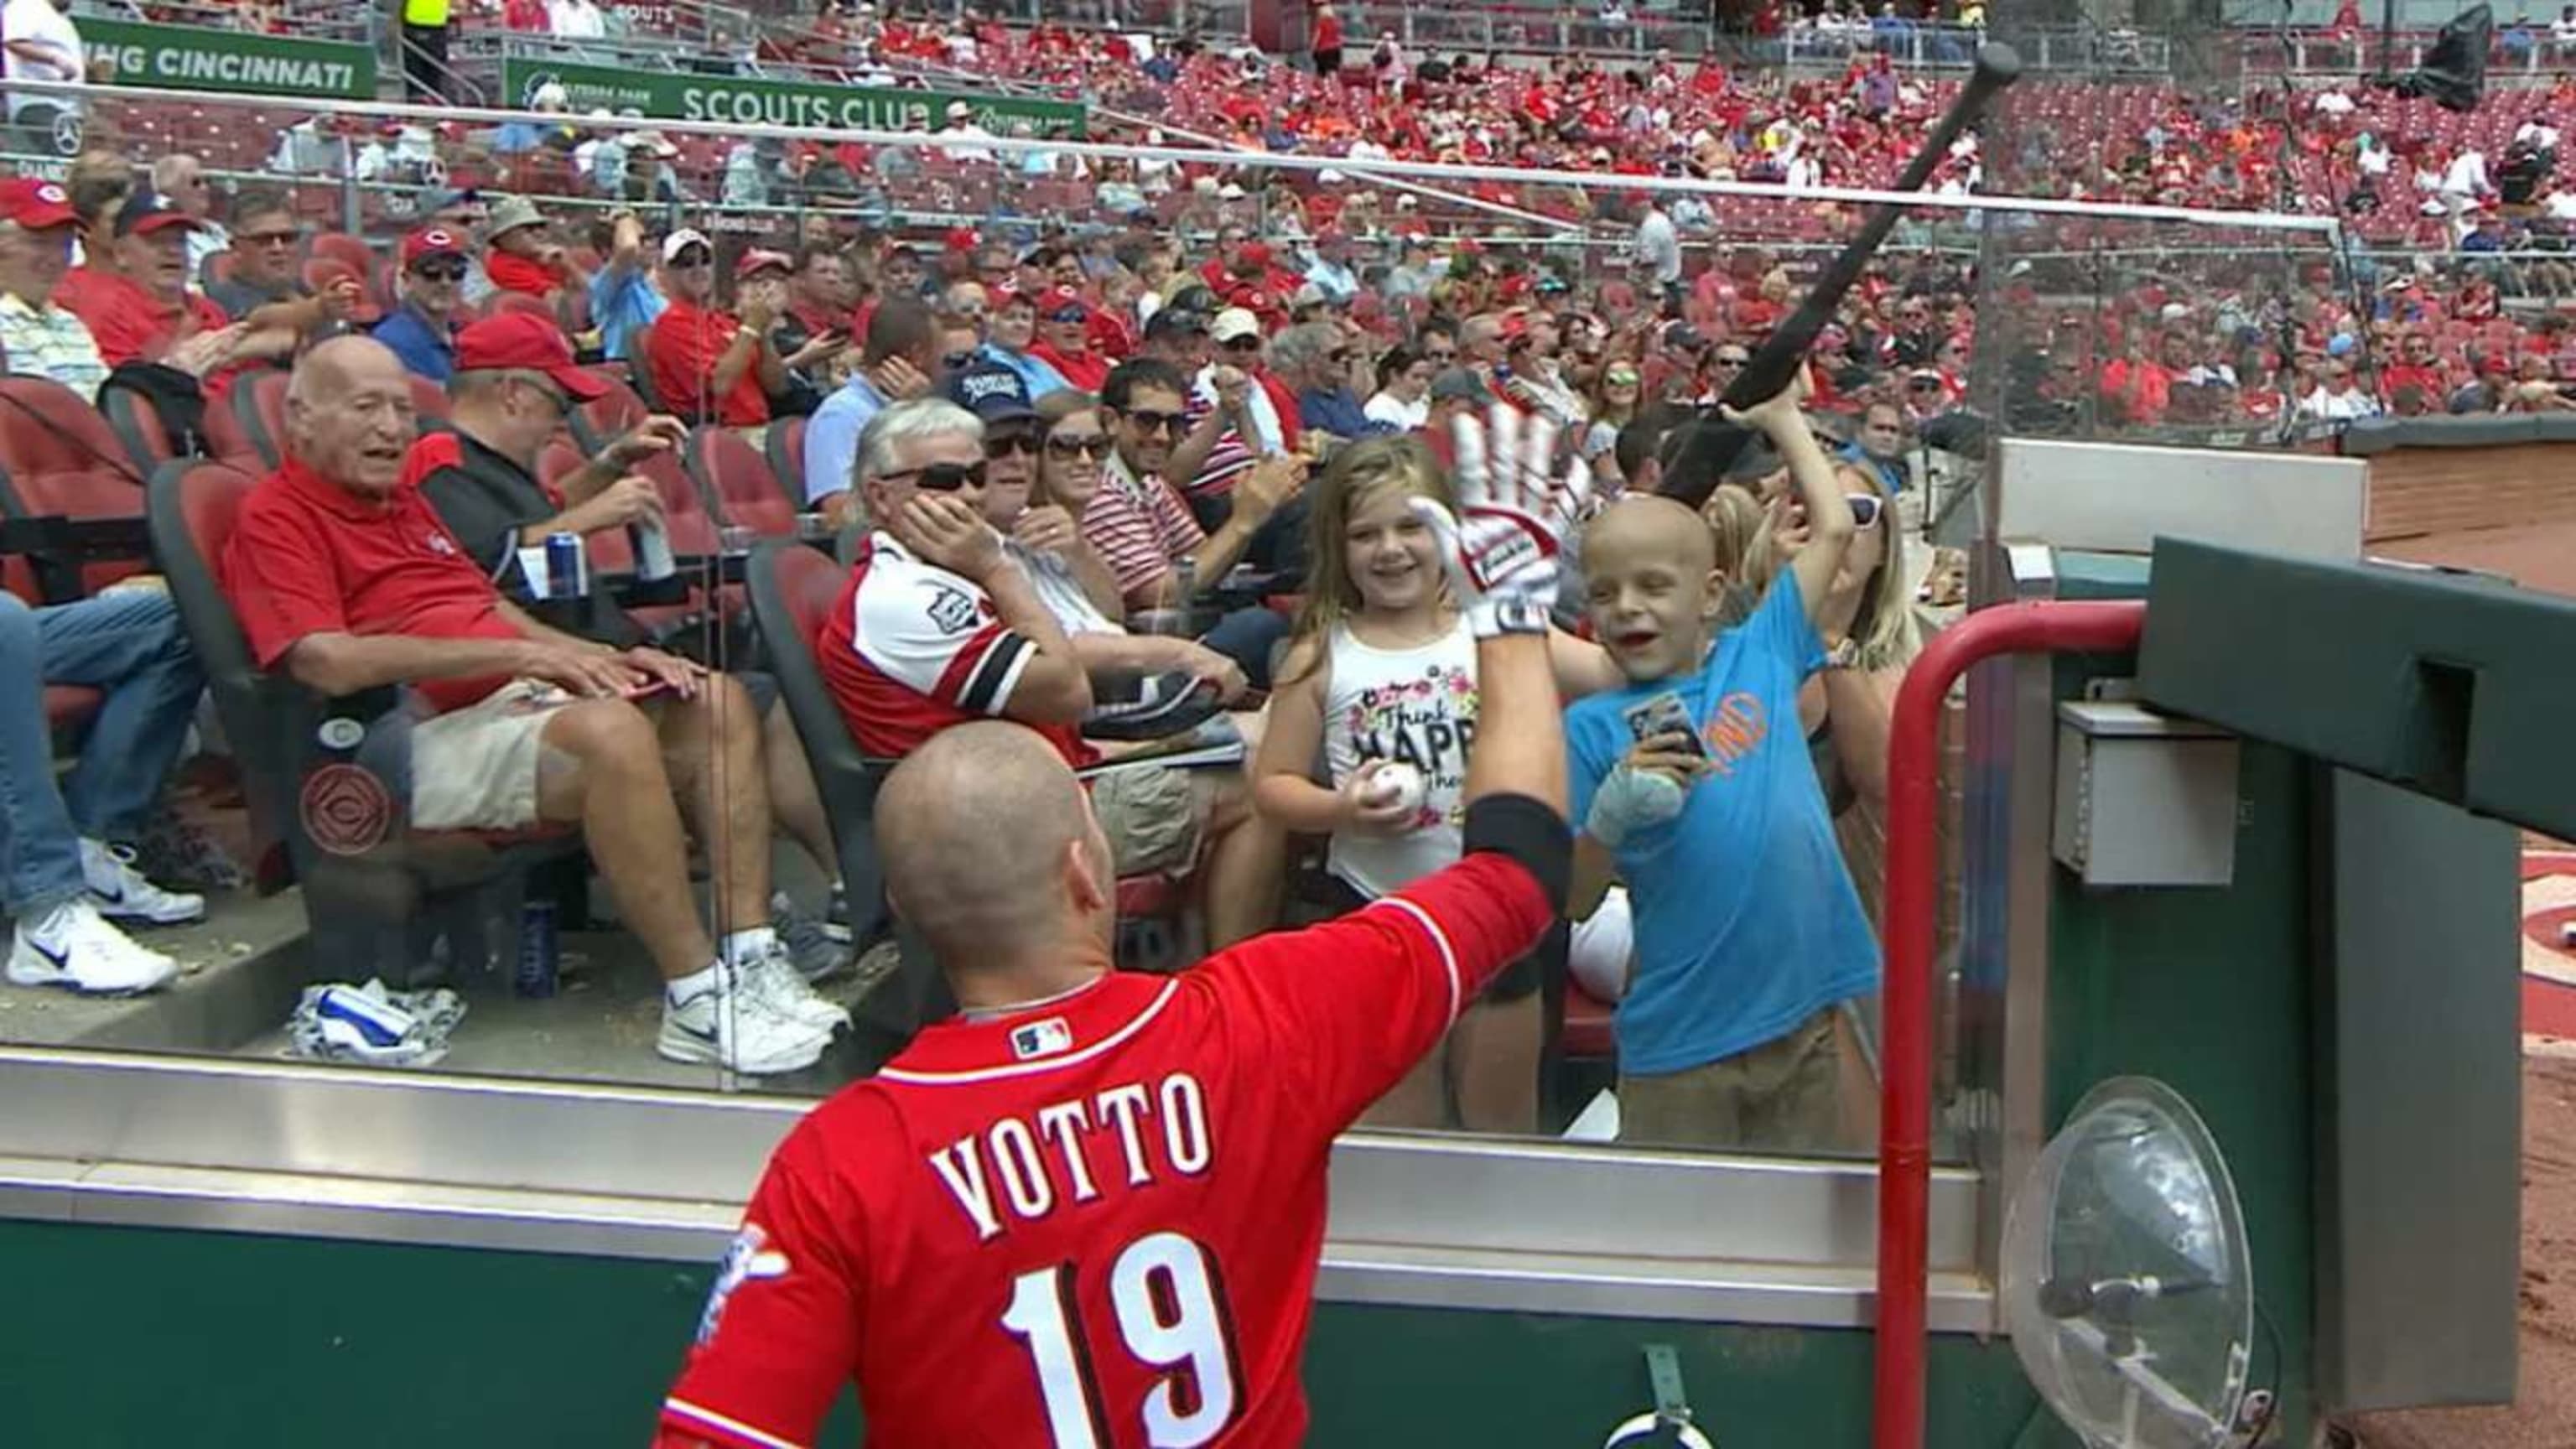 After hitting a home run, Joey Votto gave his bat and jersey to a